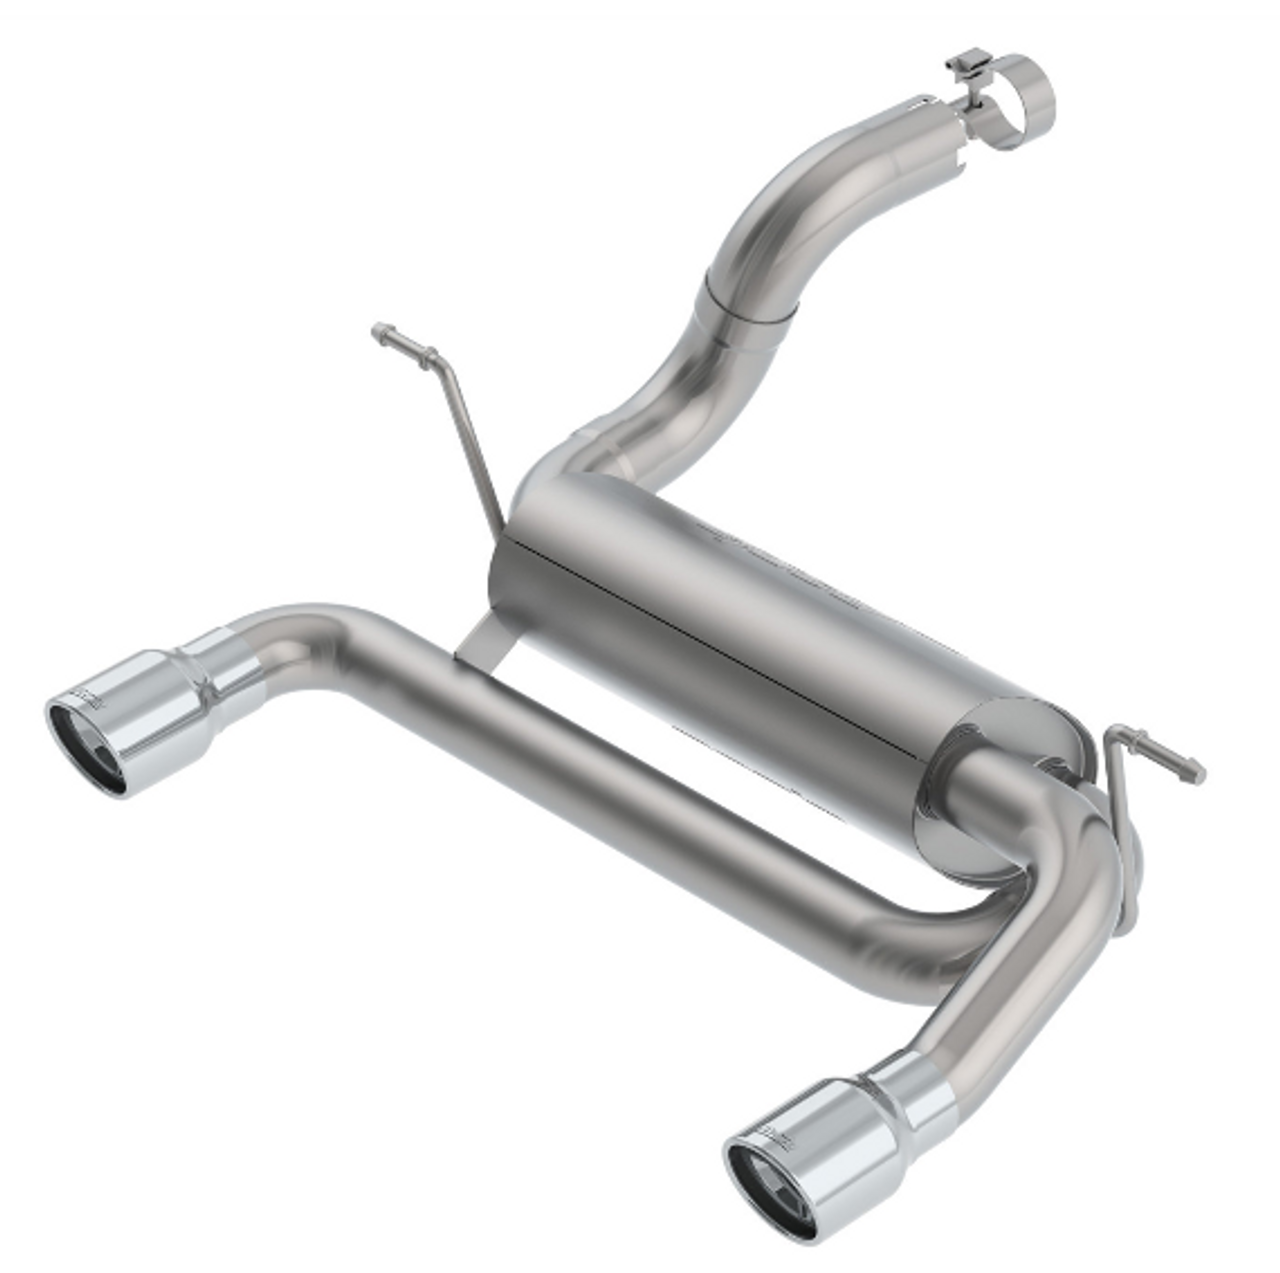 Borla 11962 Touring 2.5" Axle Back Exhaust in Stainless Steel for Jeep Wrangler JL 2.0L 2018+